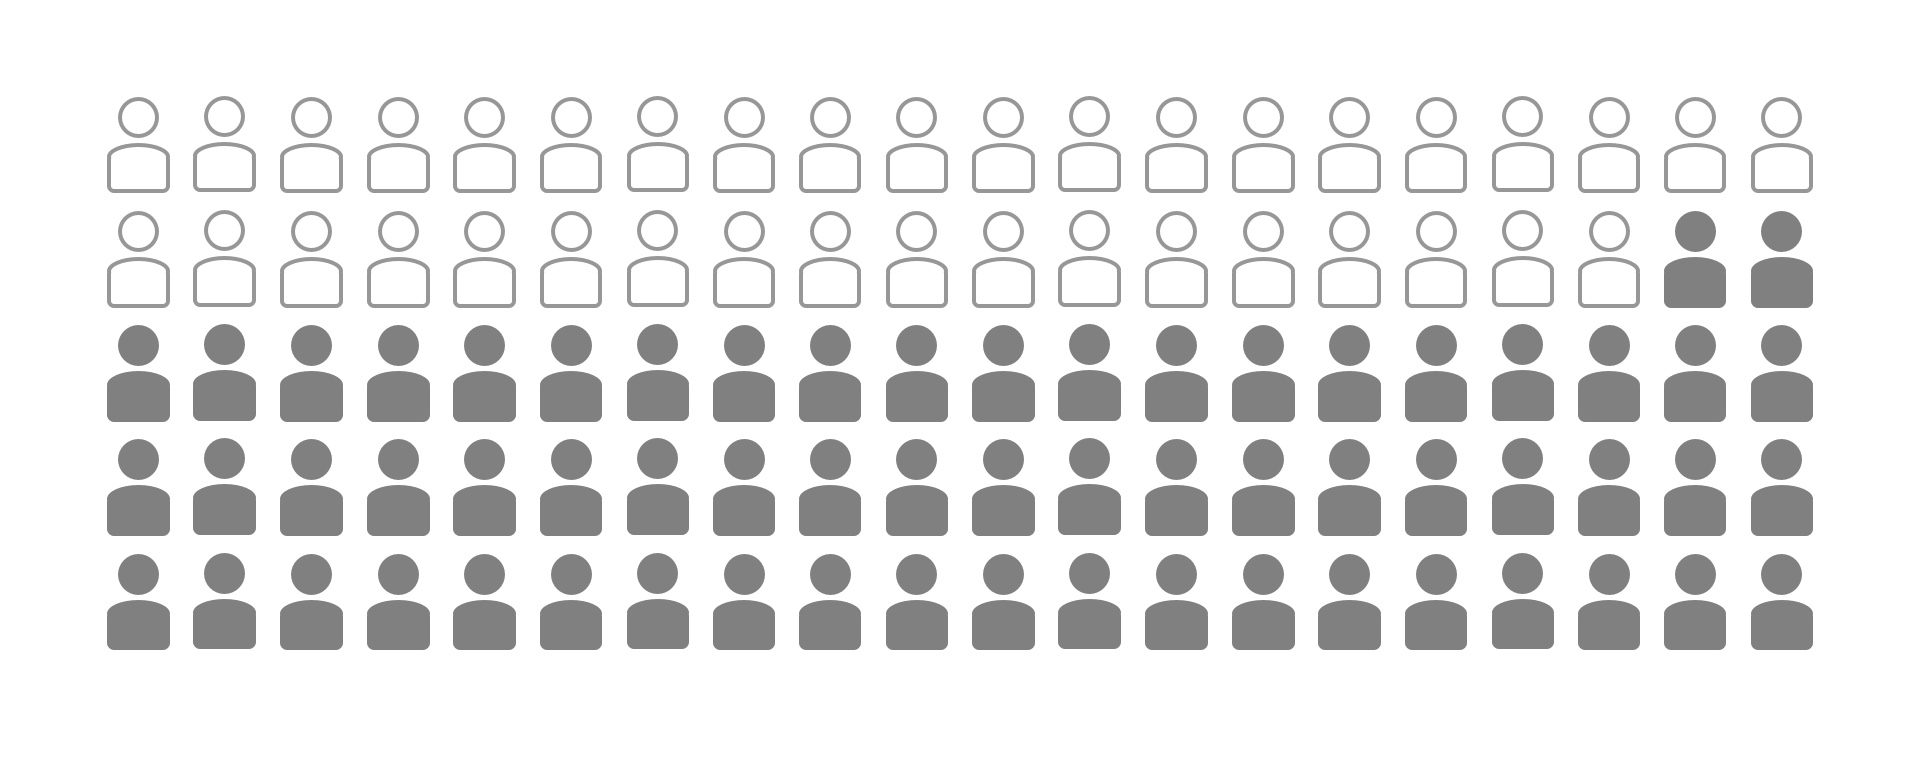 100 grey simple illustration that represent a person. 38 of those 100 is white with a grey border